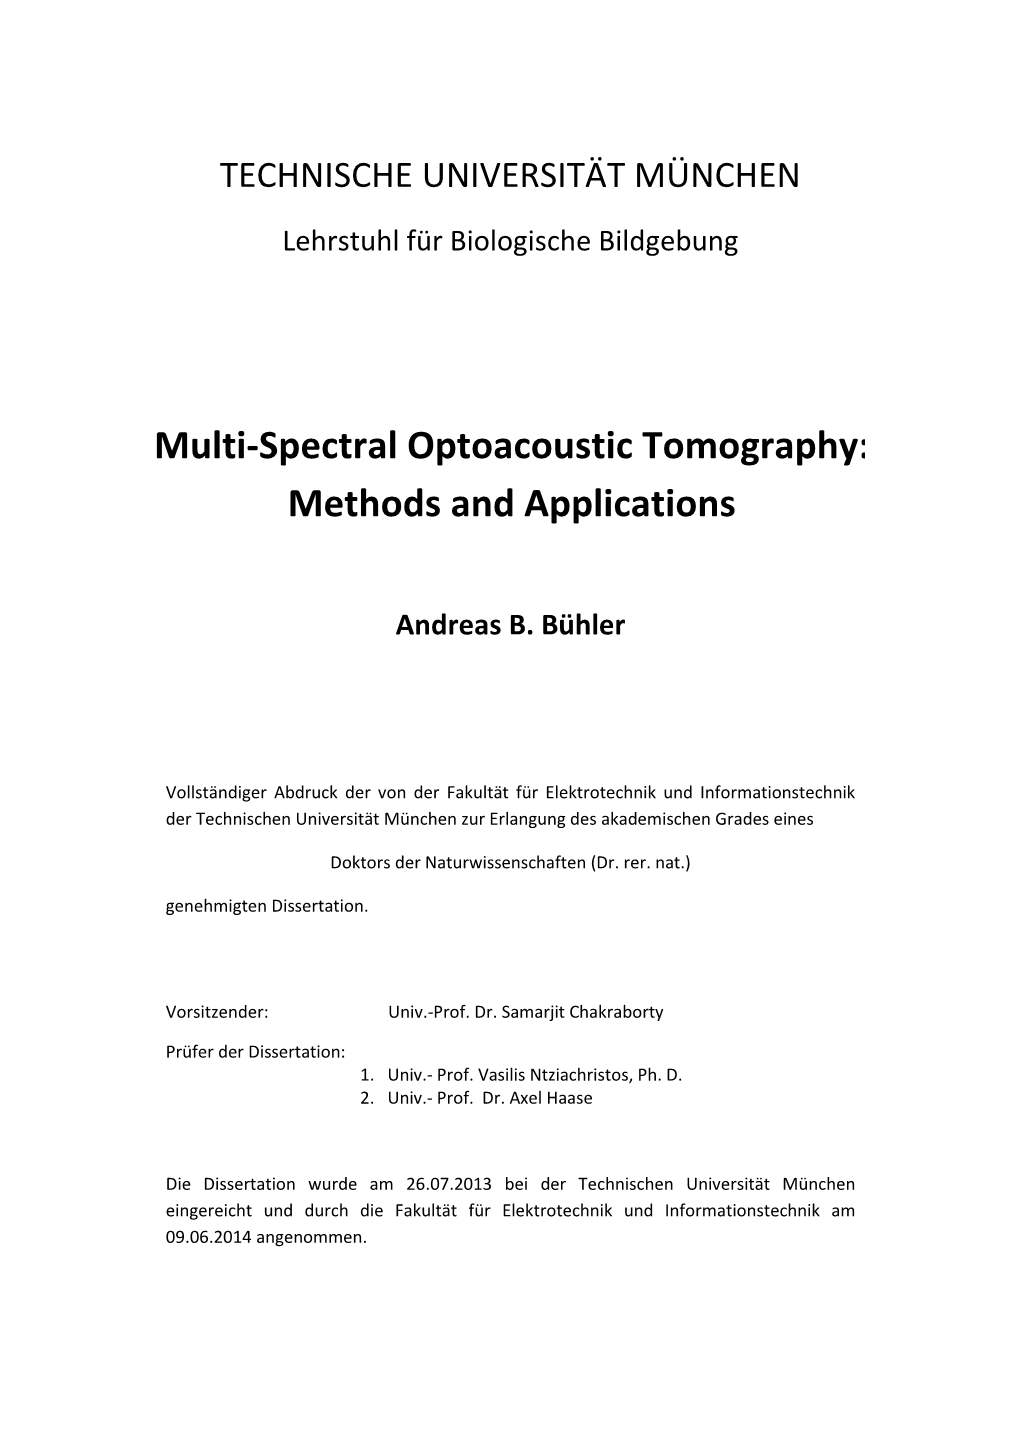 Multi-Spectral Optoacoustic Tomography: Methods and Applications